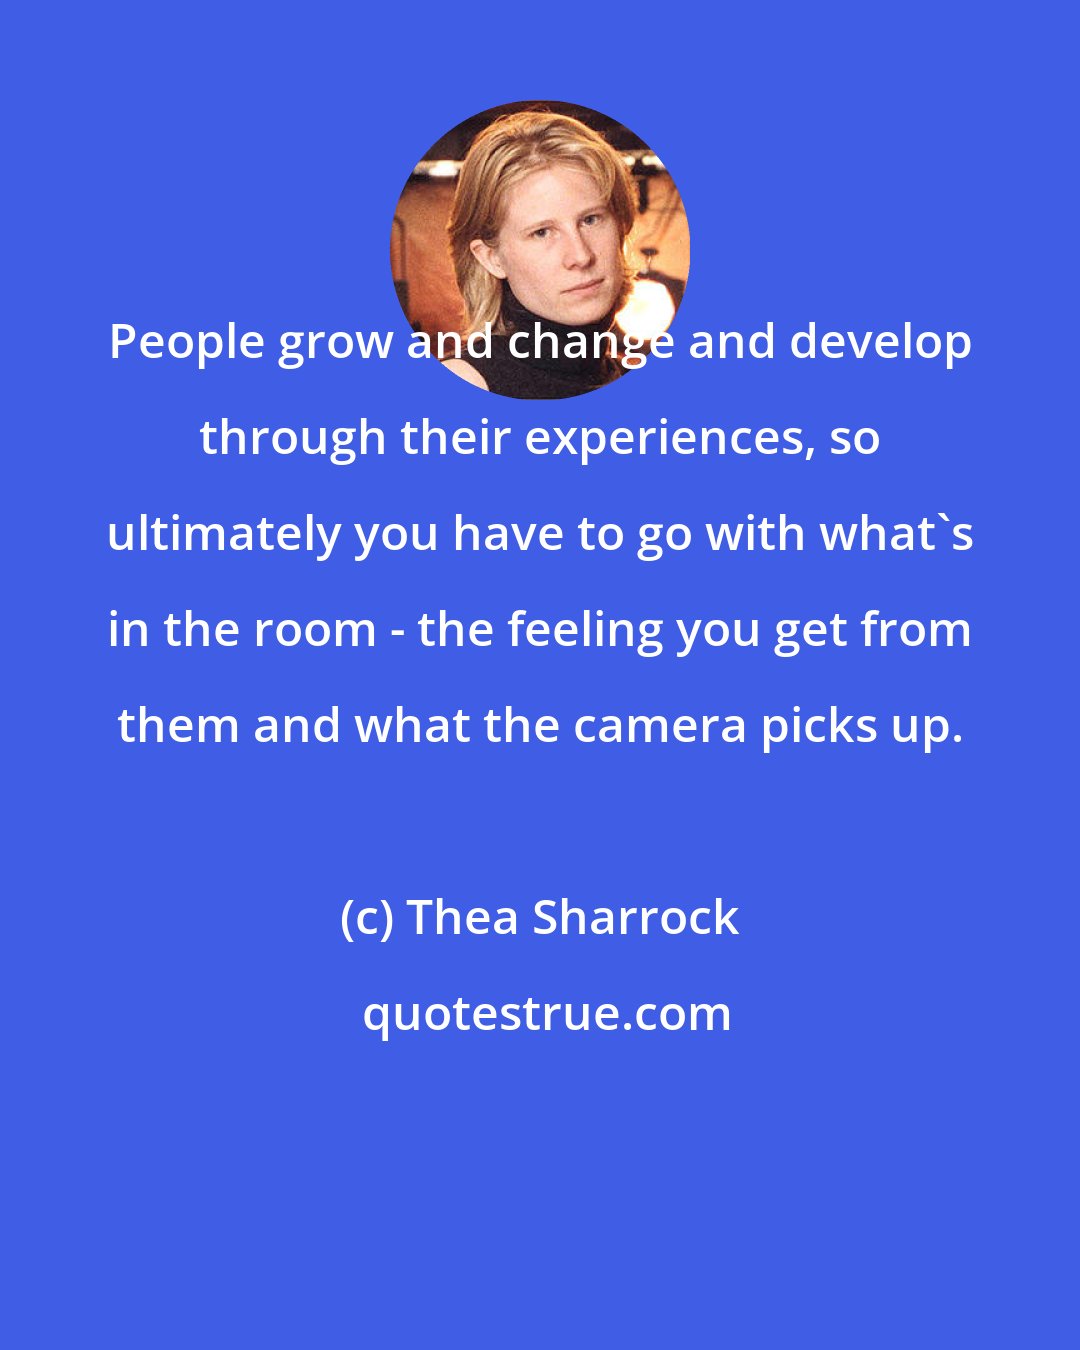 Thea Sharrock: People grow and change and develop through their experiences, so ultimately you have to go with what's in the room - the feeling you get from them and what the camera picks up.